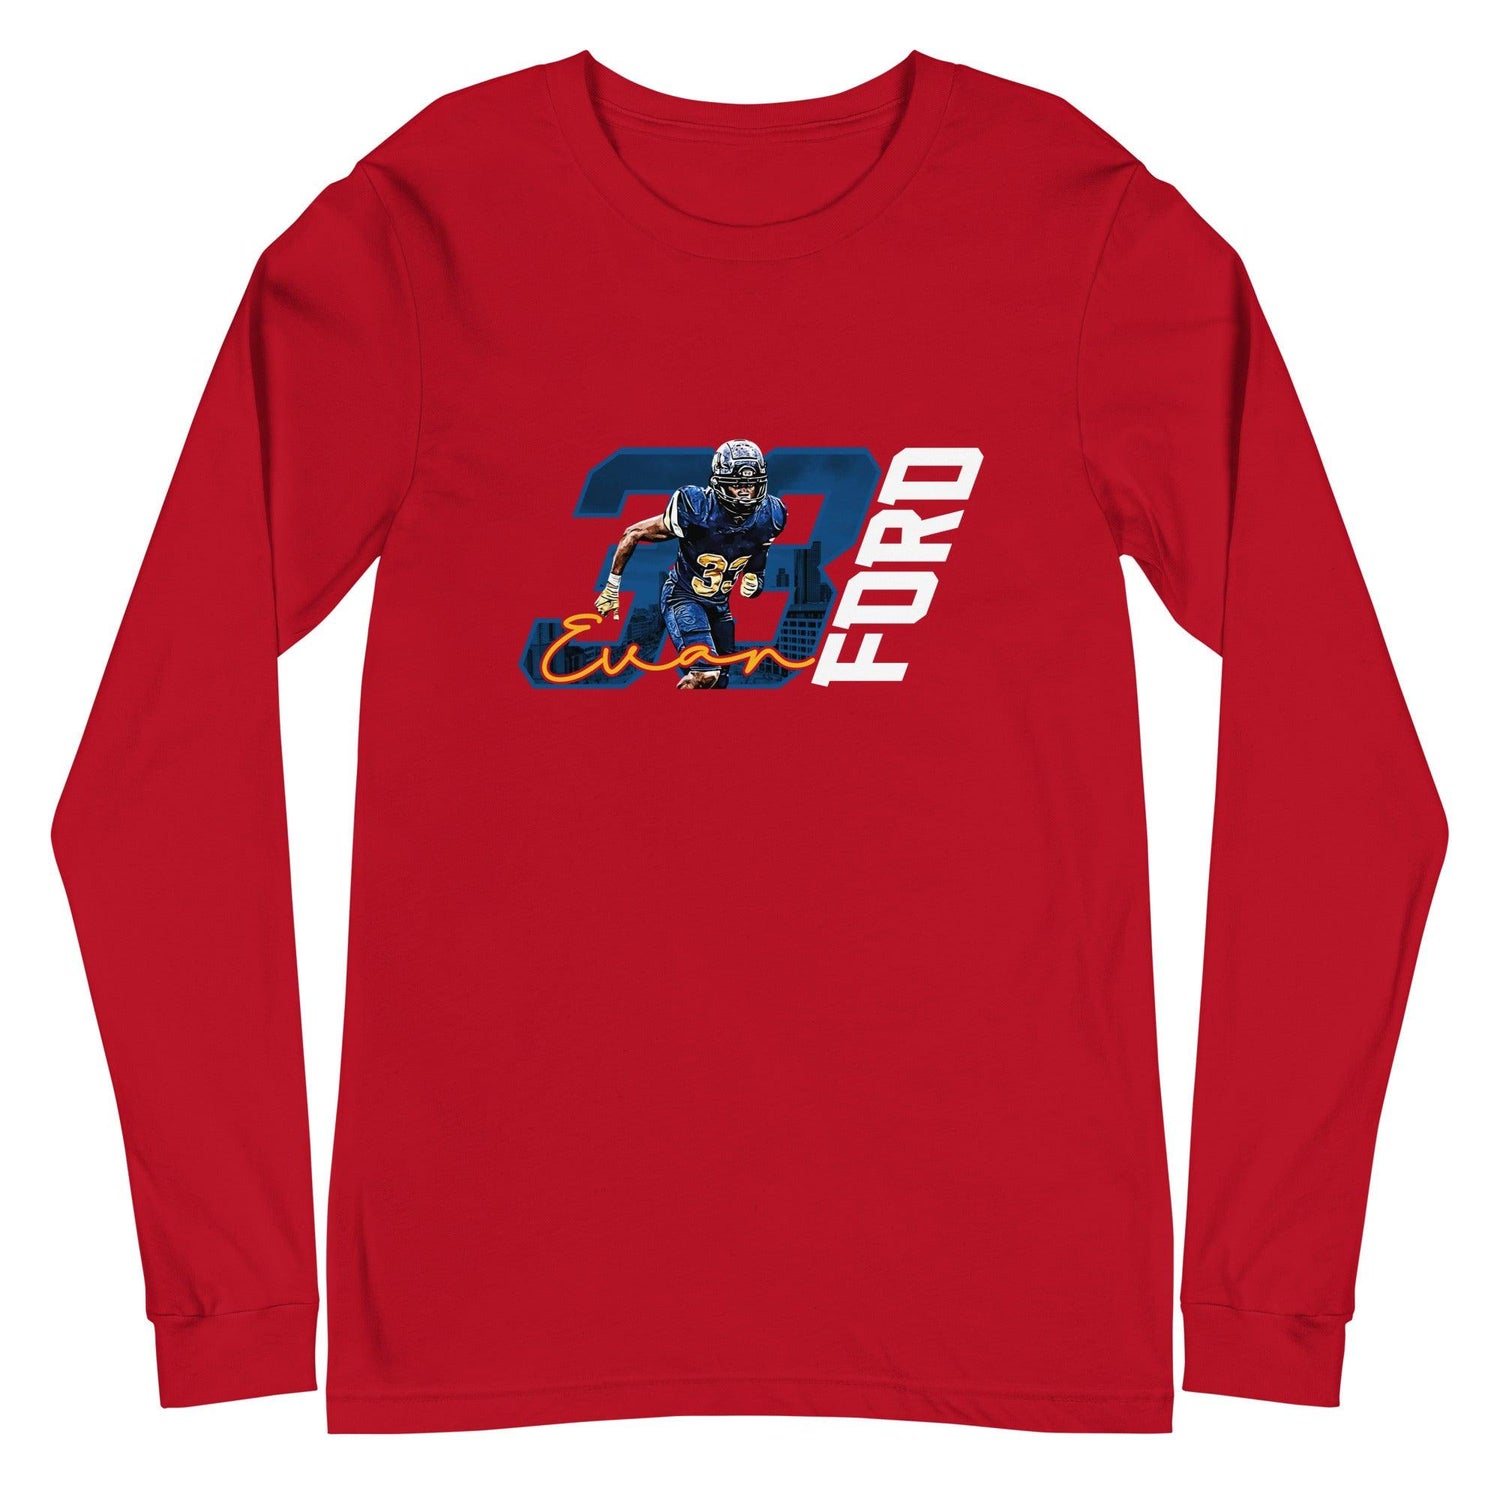 Evan Ford "Gameday" Long Sleeve Tee - Fan Arch